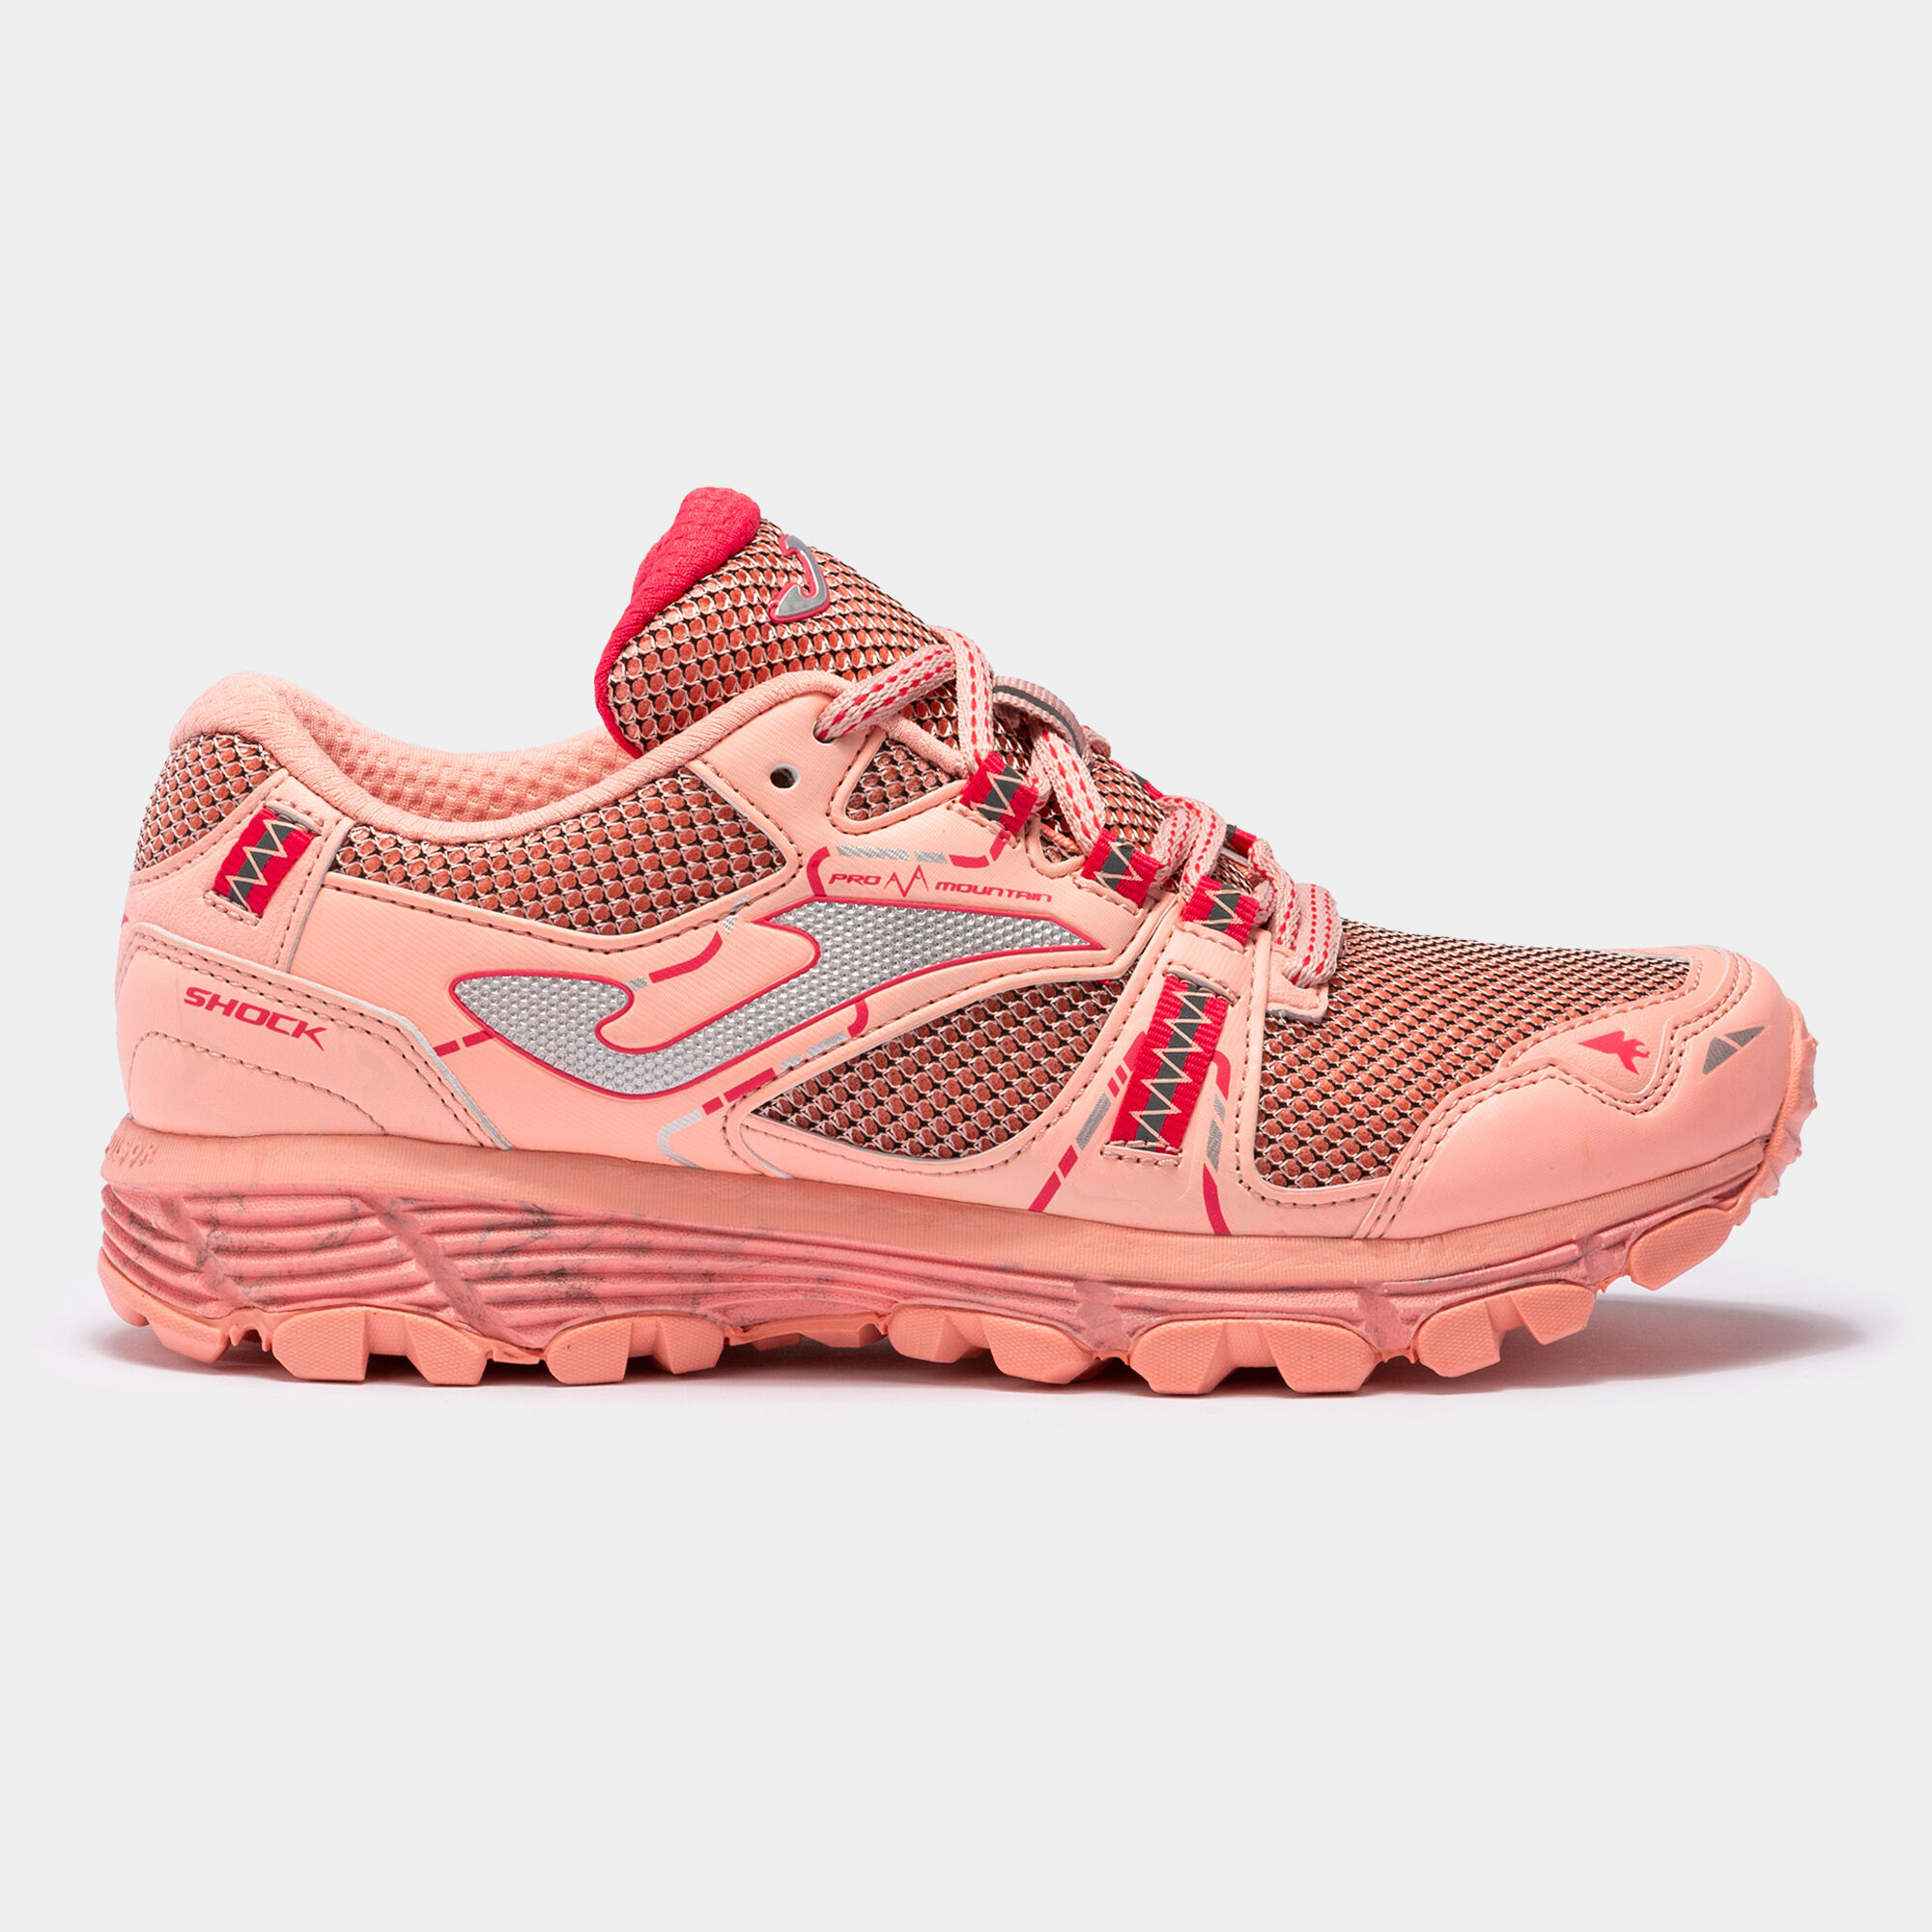 Trail-running shoes Shock 22 woman pink gray